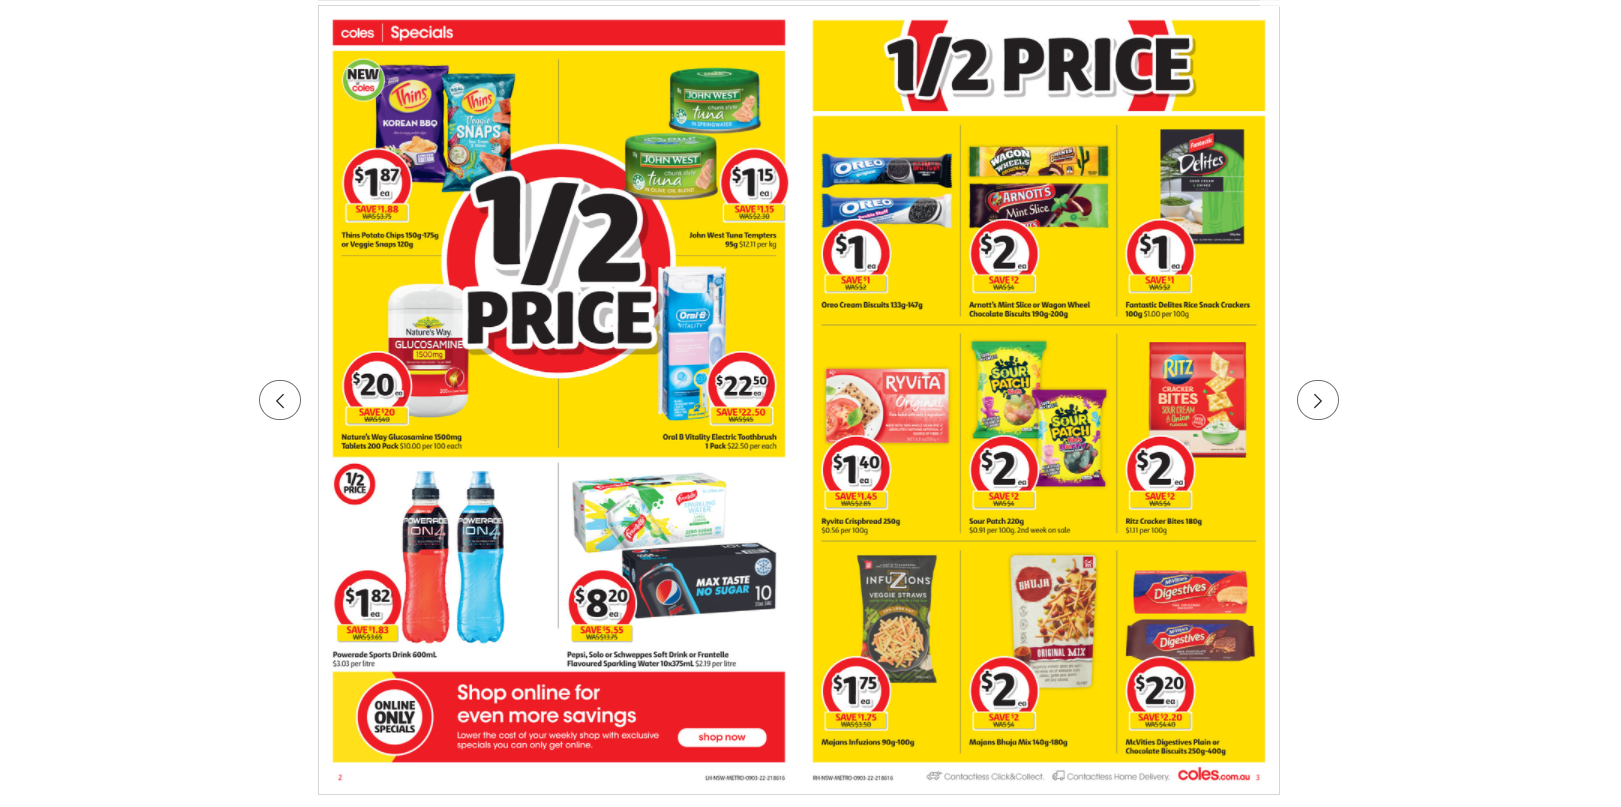 Coles this week's catalogue up to 50% OFF on groceries, beauty & everyday essentials(until 15th Mar)